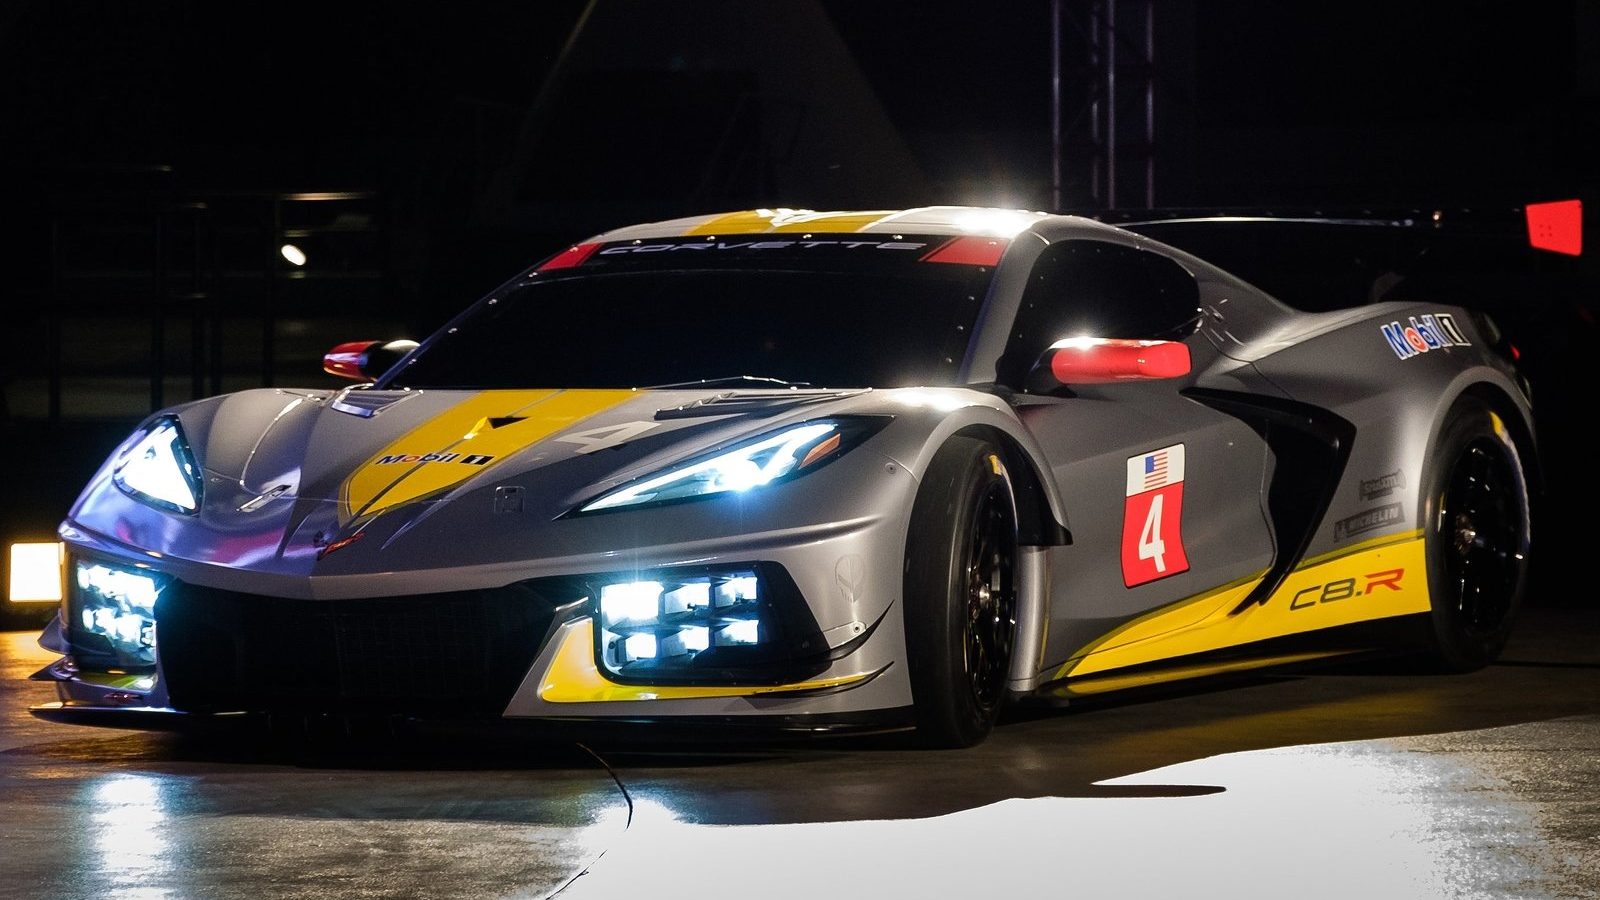 An image of a Chevrolet Corvette C8.R parked outdoors.